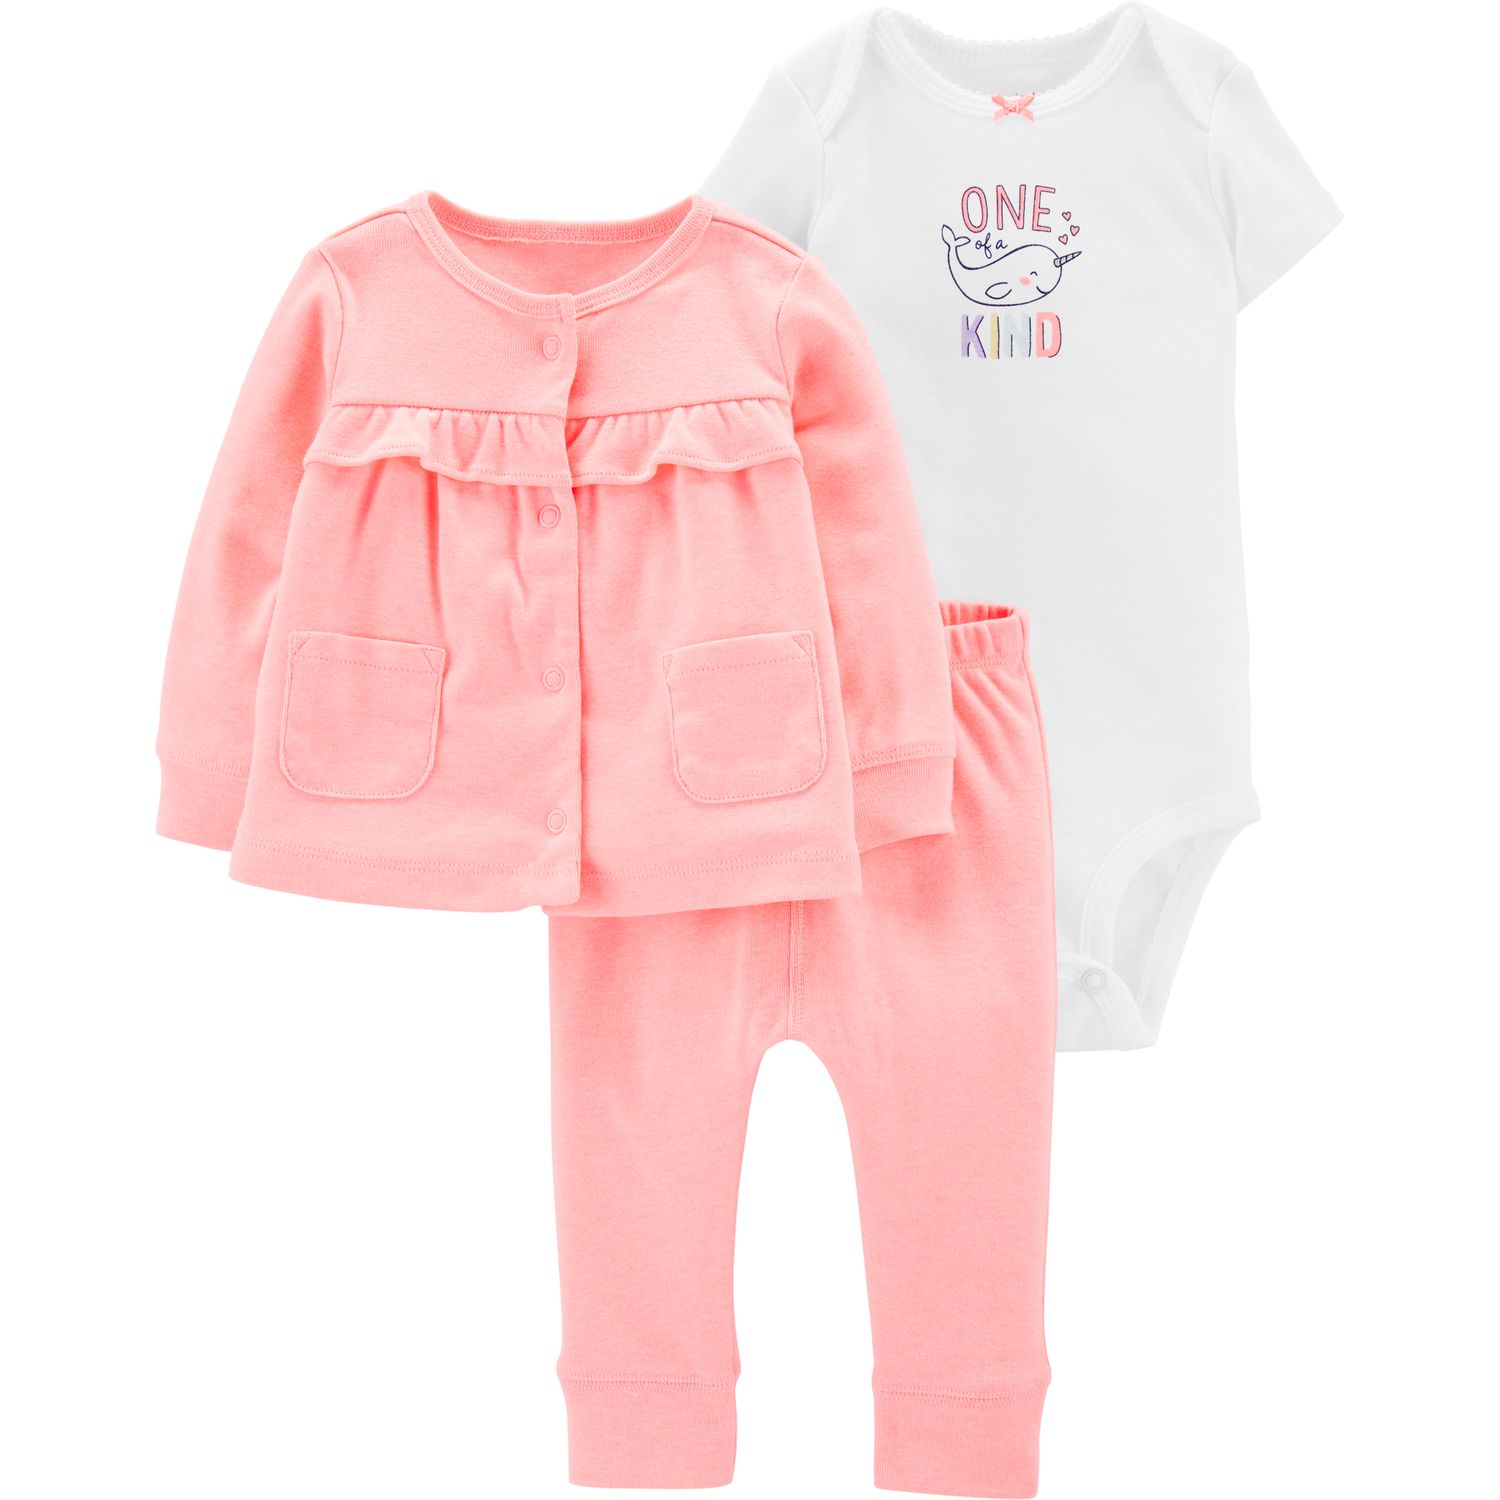 jcpenney carters baby girl